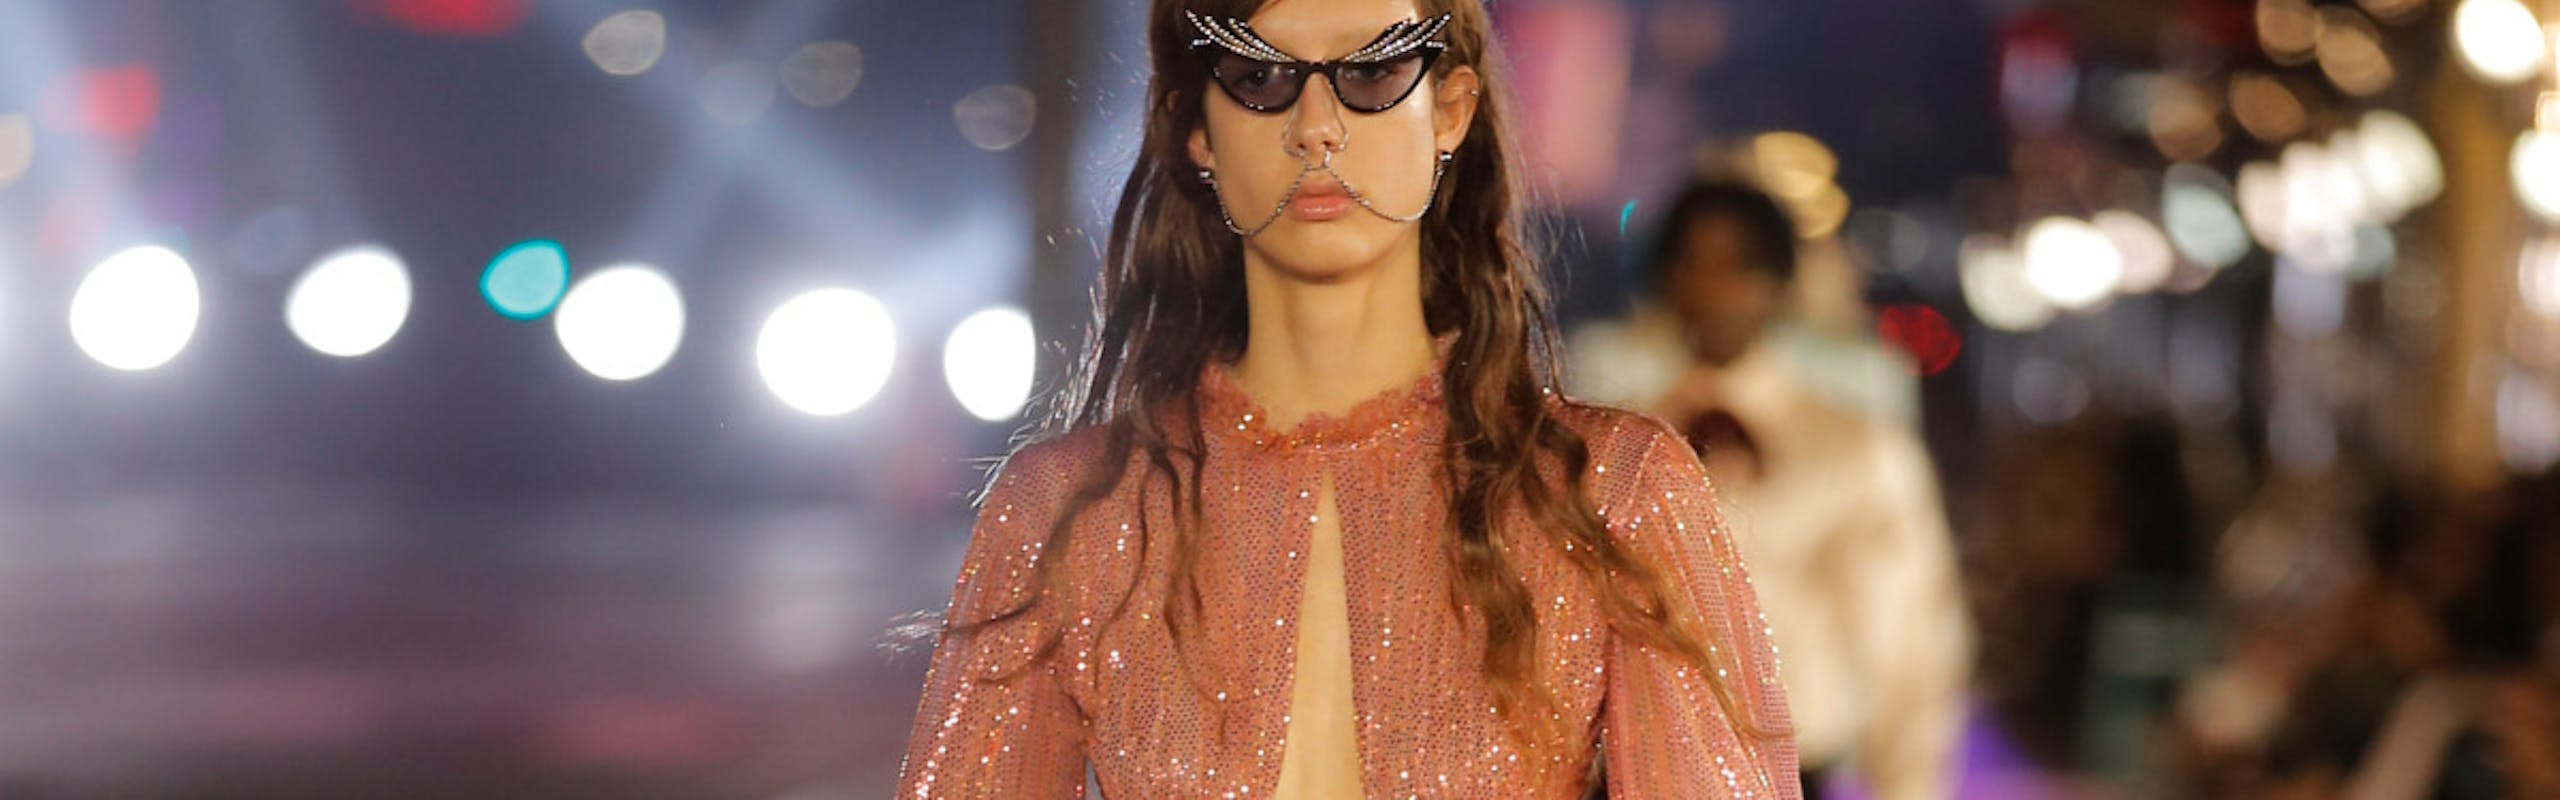 A model in Gucci runway show wearing a salmon shimmery dress with feathery details and black cat eye sunglasses